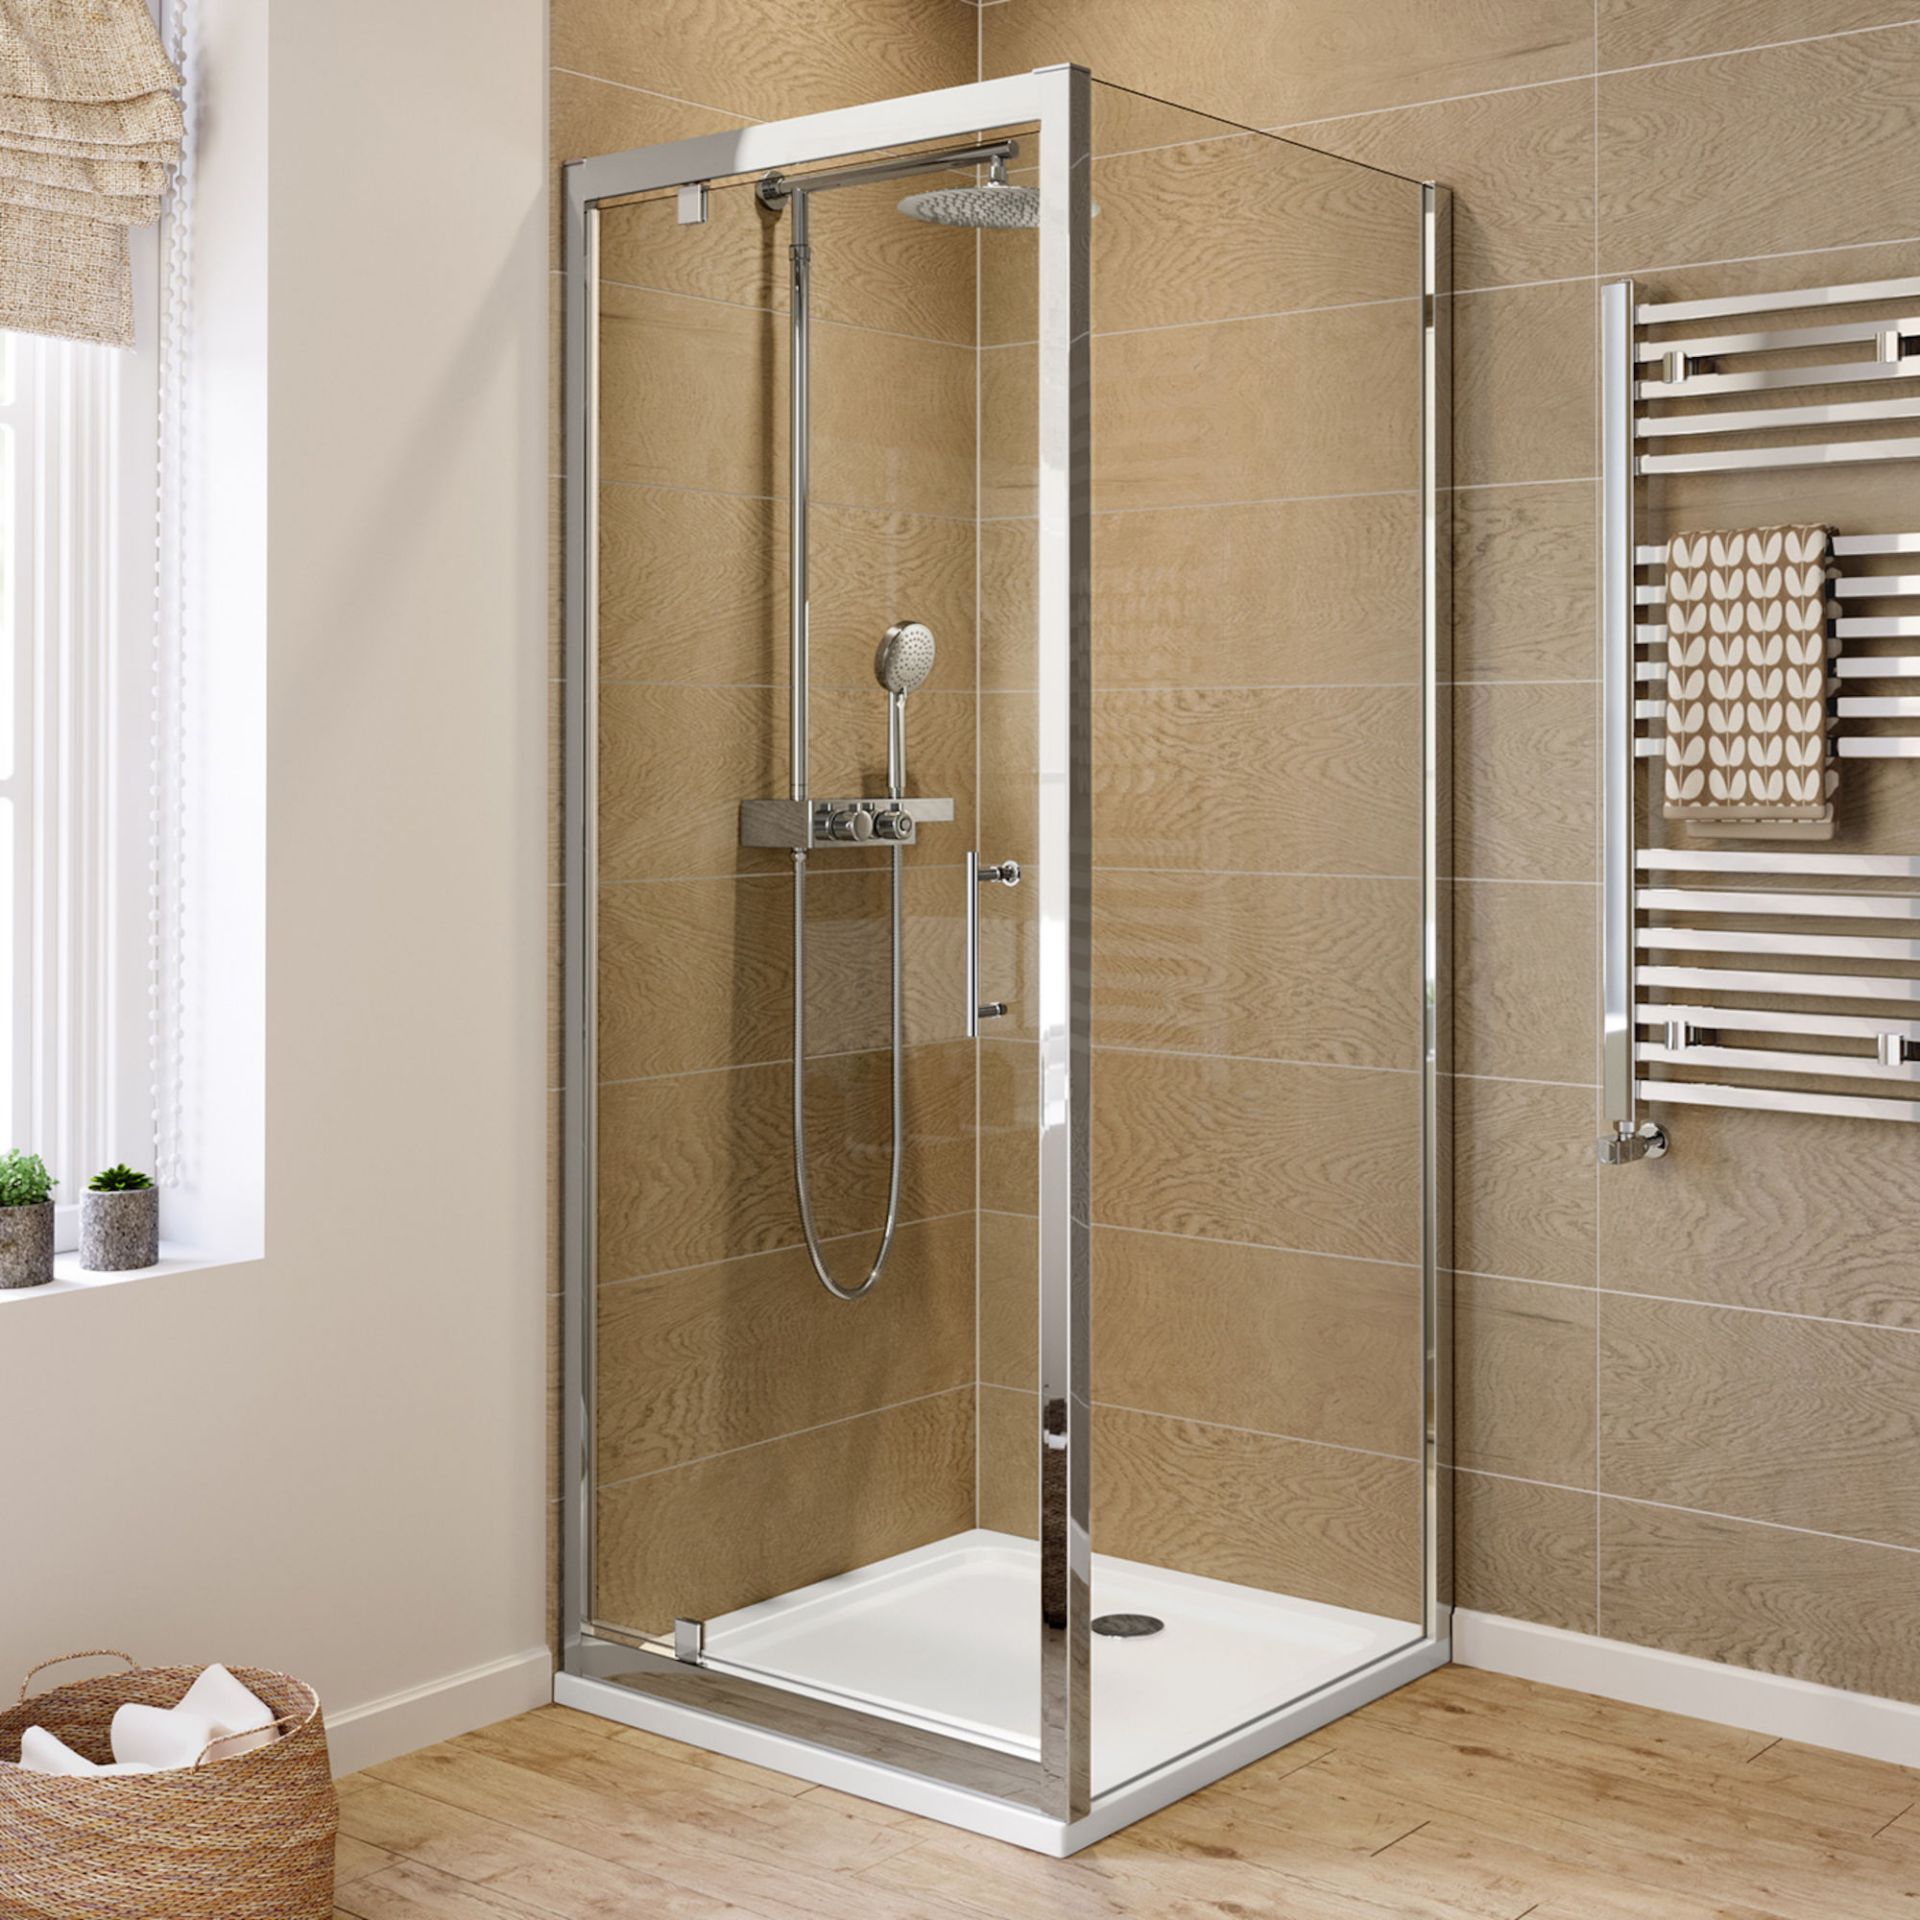 (CT145) 900x760mm - 6mm - Elements Pivot Door Shower Enclosure. RRP £340.99. 6mm Safety Glass